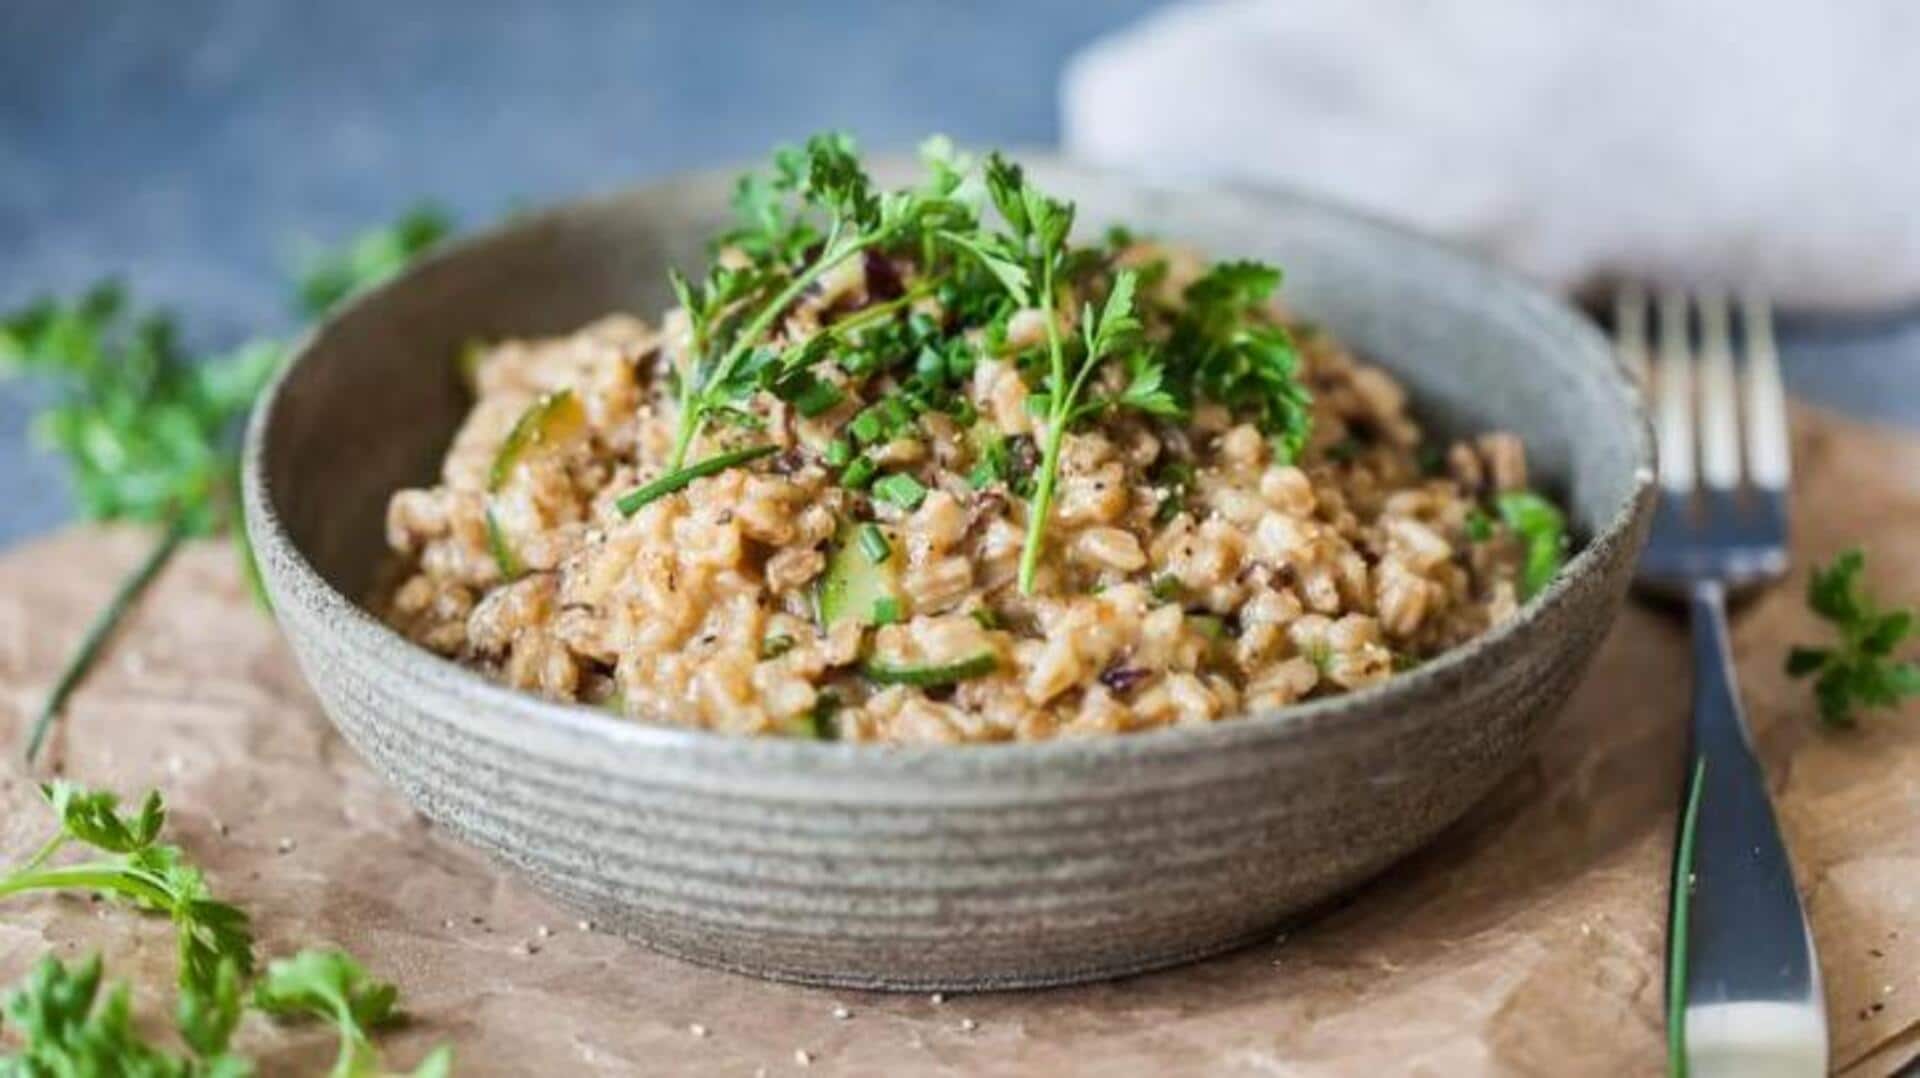 Cook this ancient grain farro risotto at home